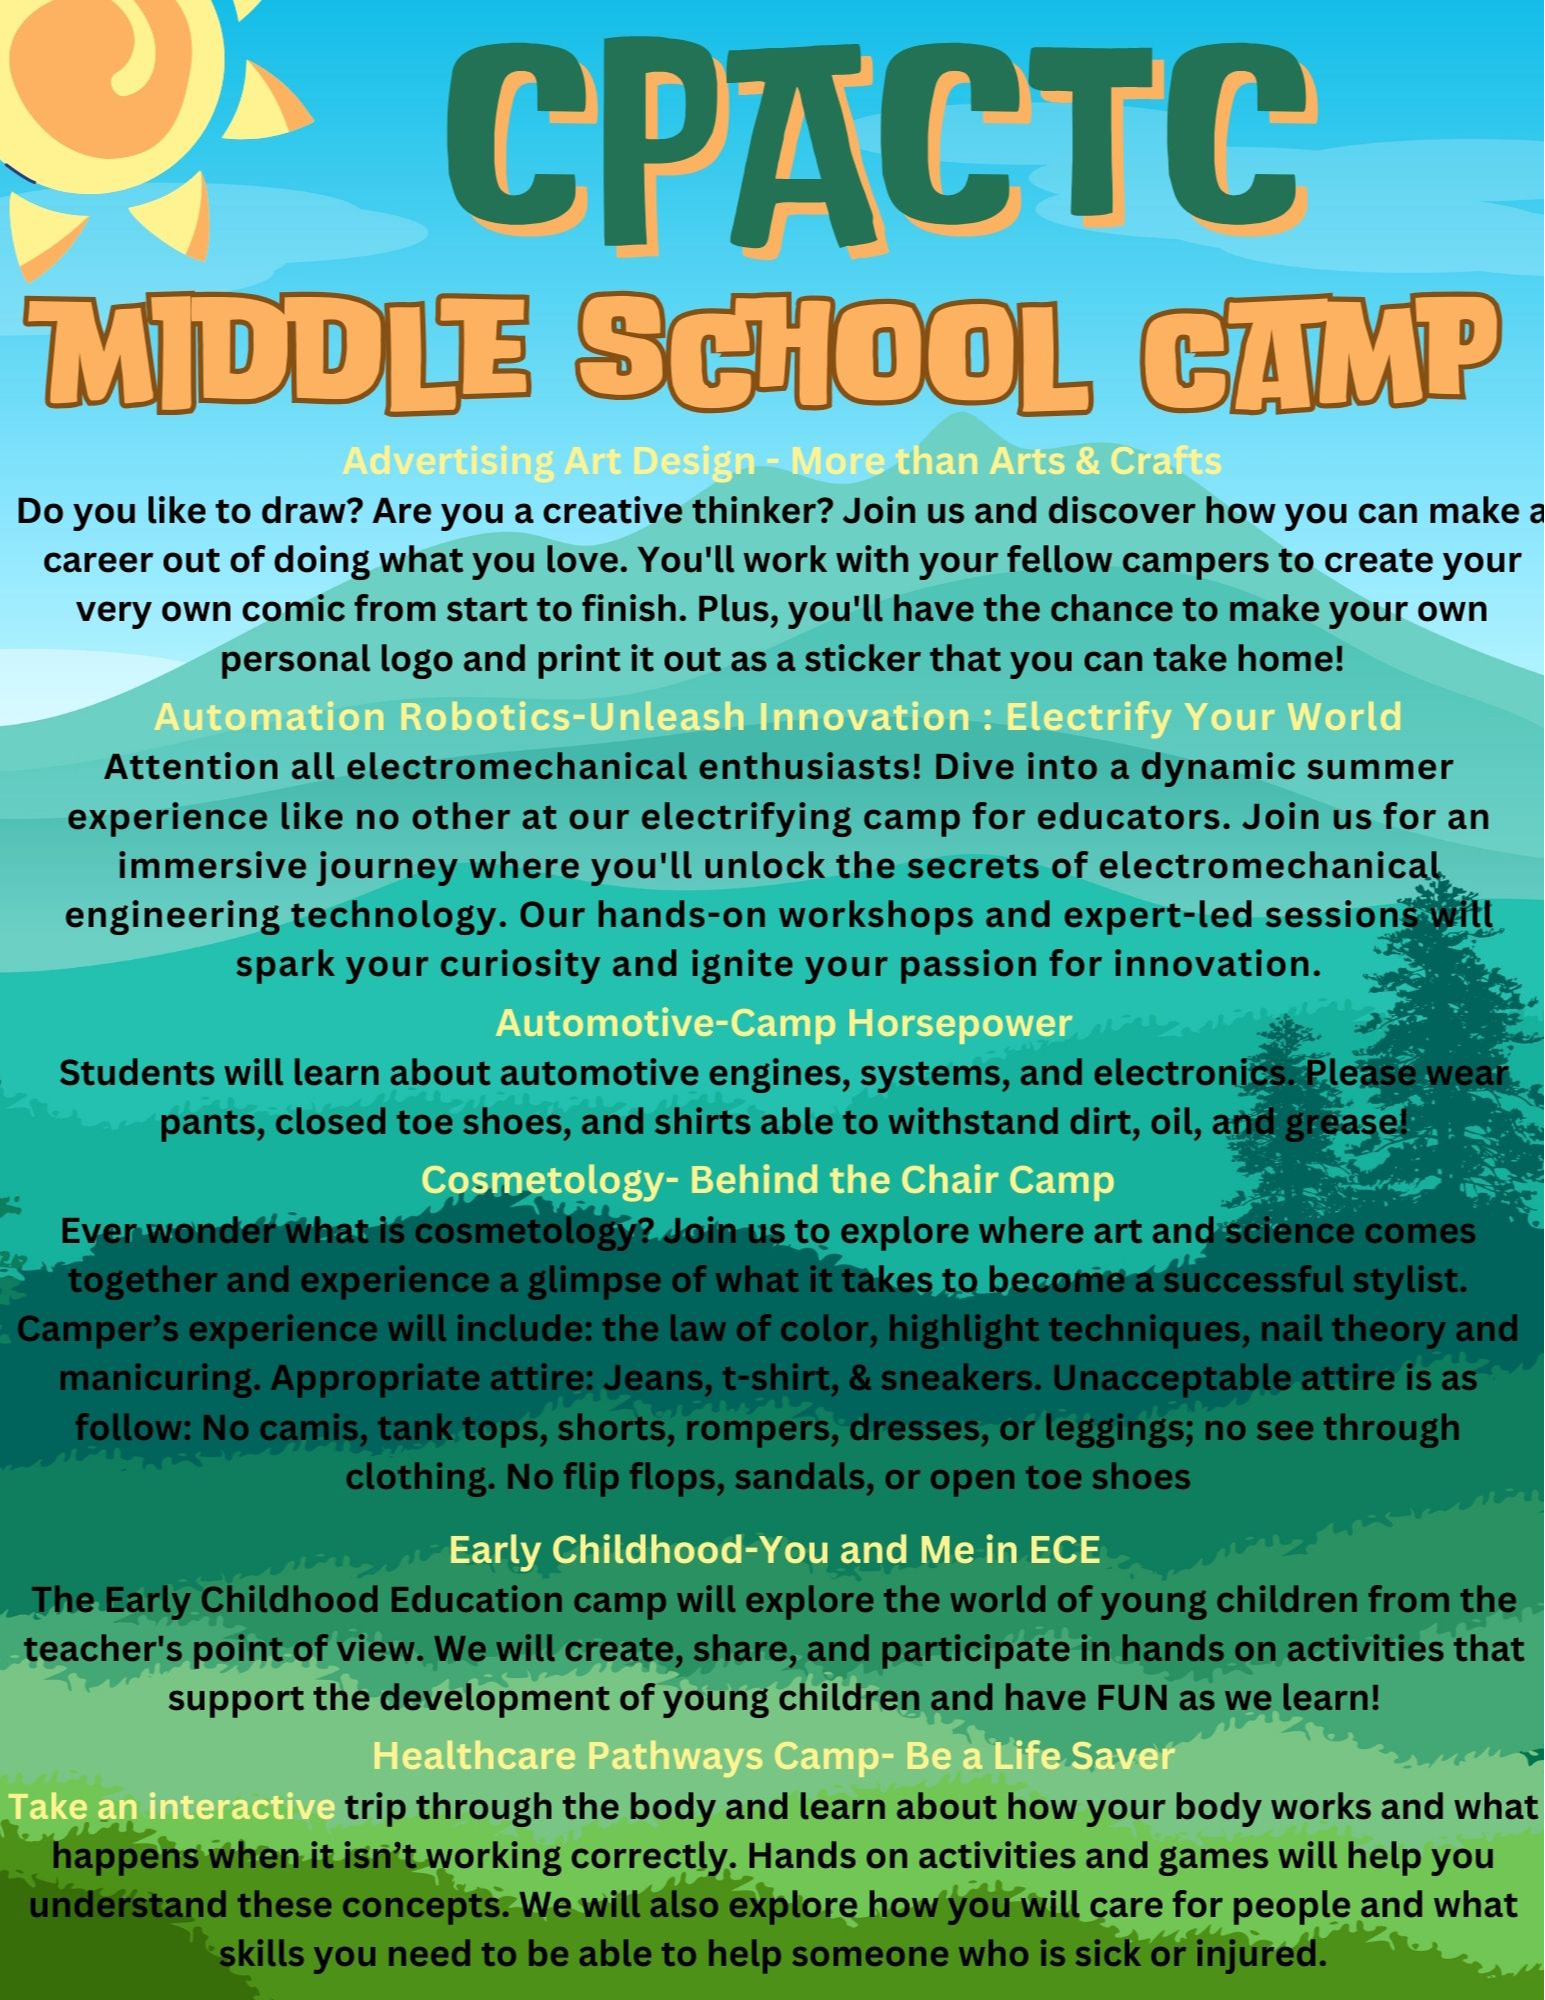 Middle School Camp